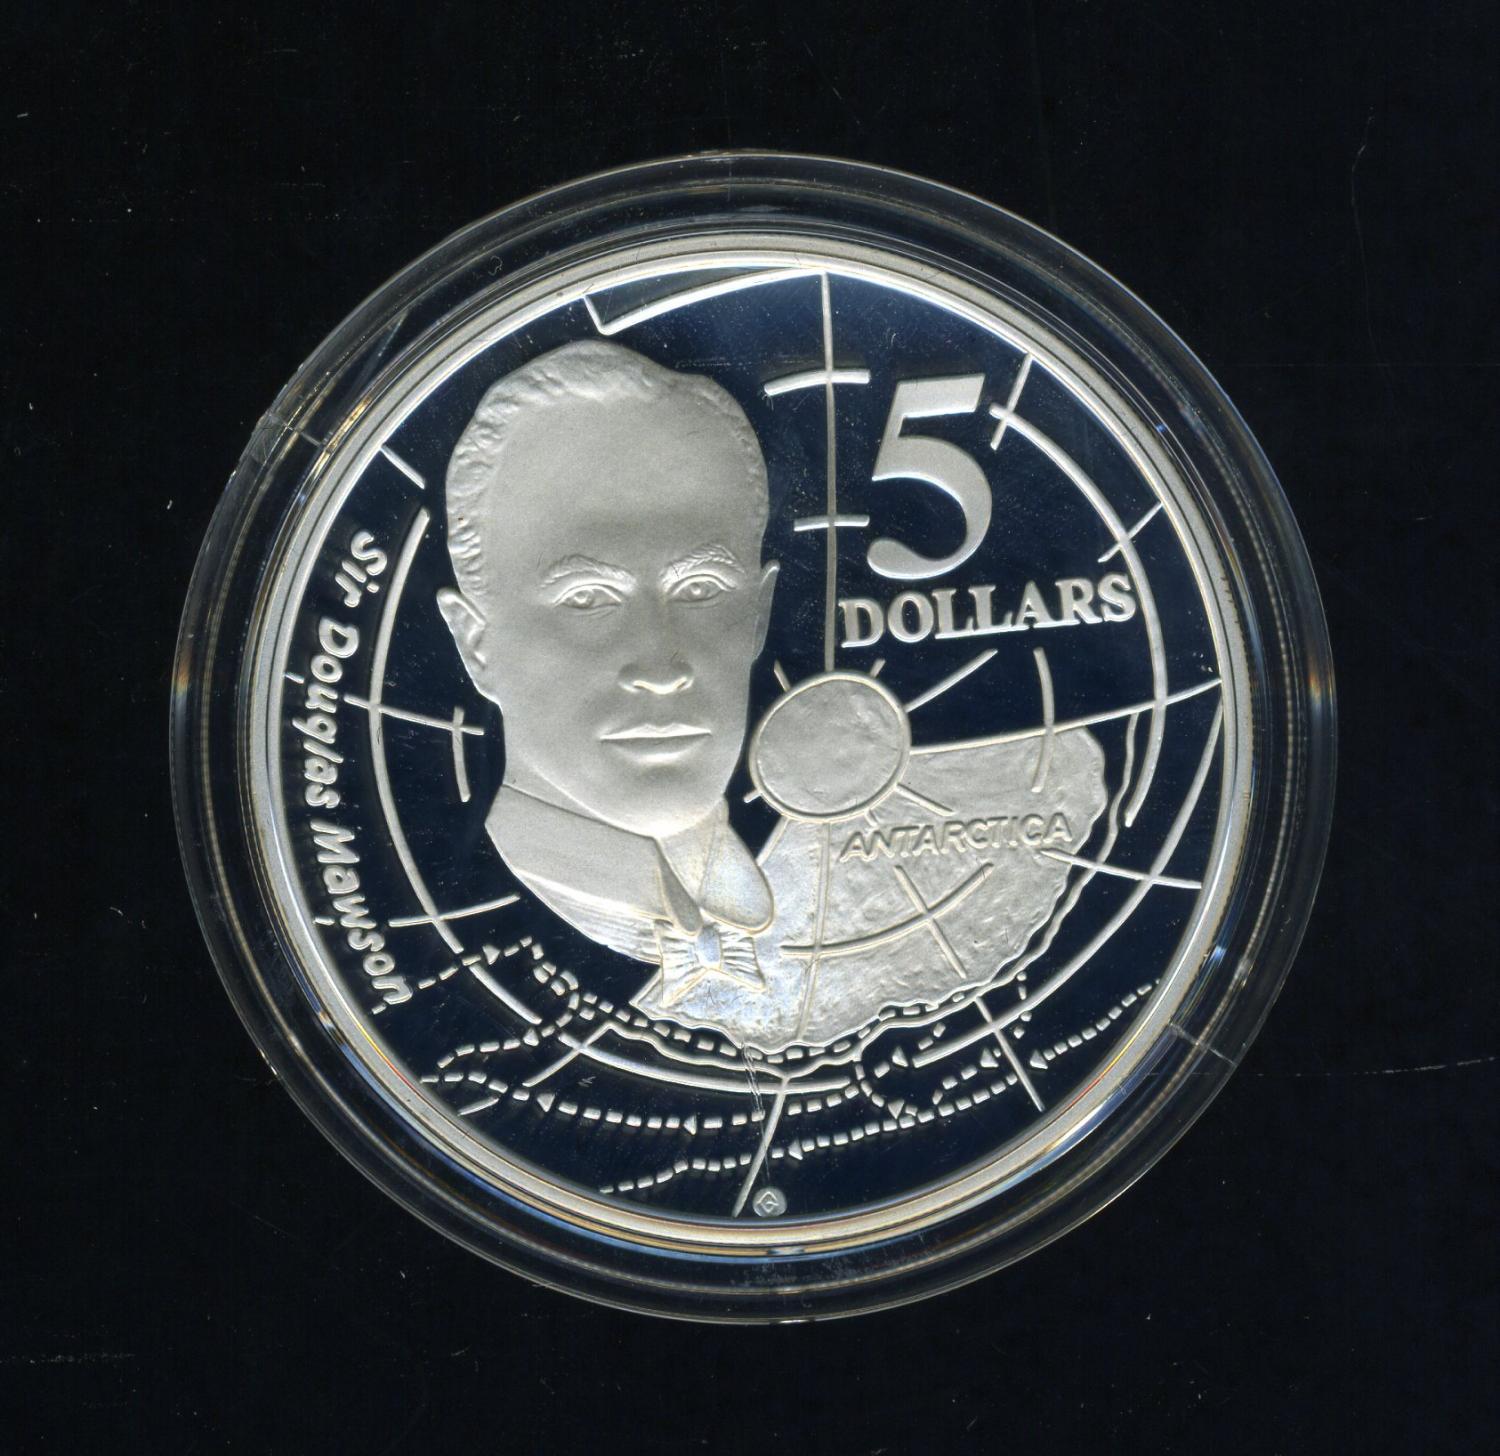 Thumbnail for 1994 Australian $5 Silver Coin From Masterpieces in Silver Set - Sir Douglas Mawson.  The Coin is Sterling Silver and contains over 1oz of Pure Silver.